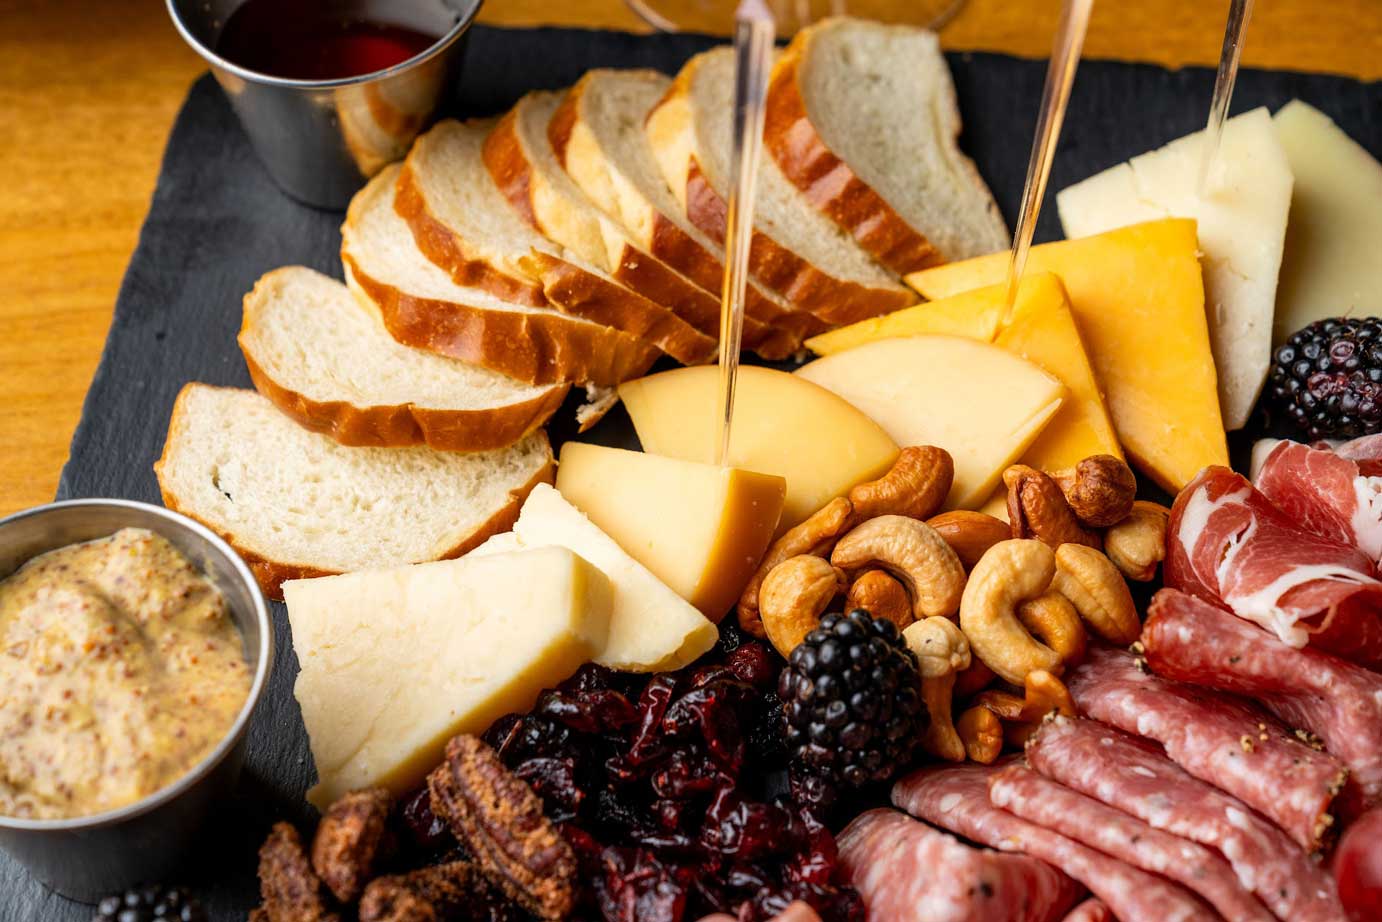 Charcuterie and cheese board